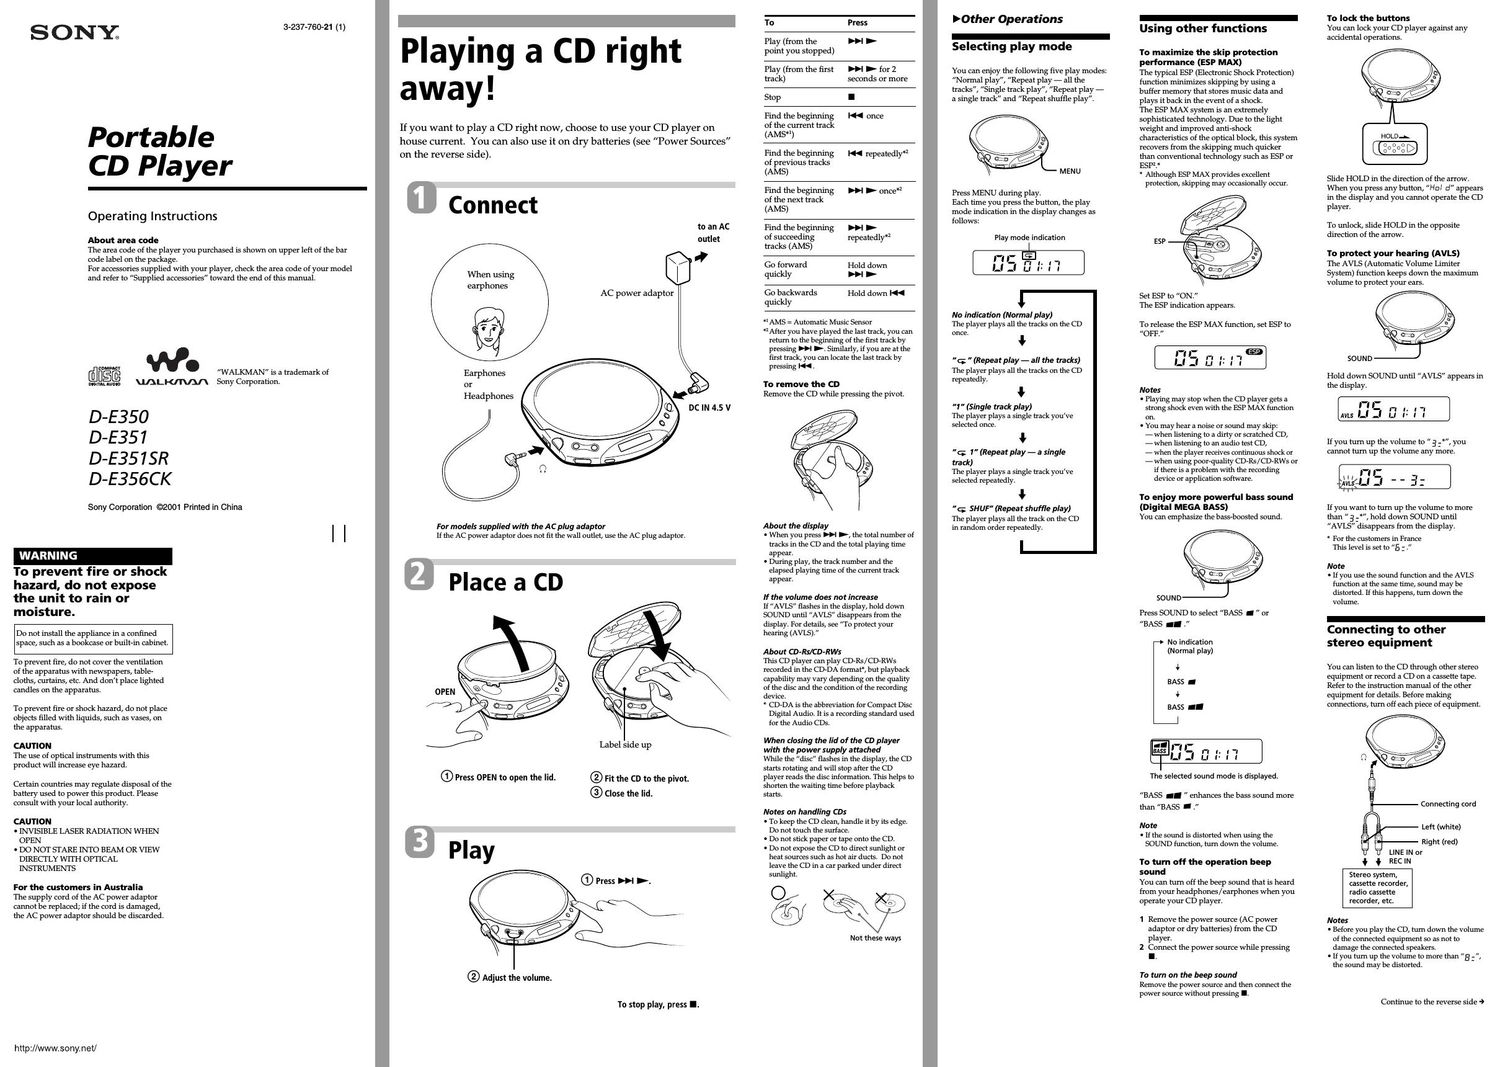 sony d e 356 ck owners manual